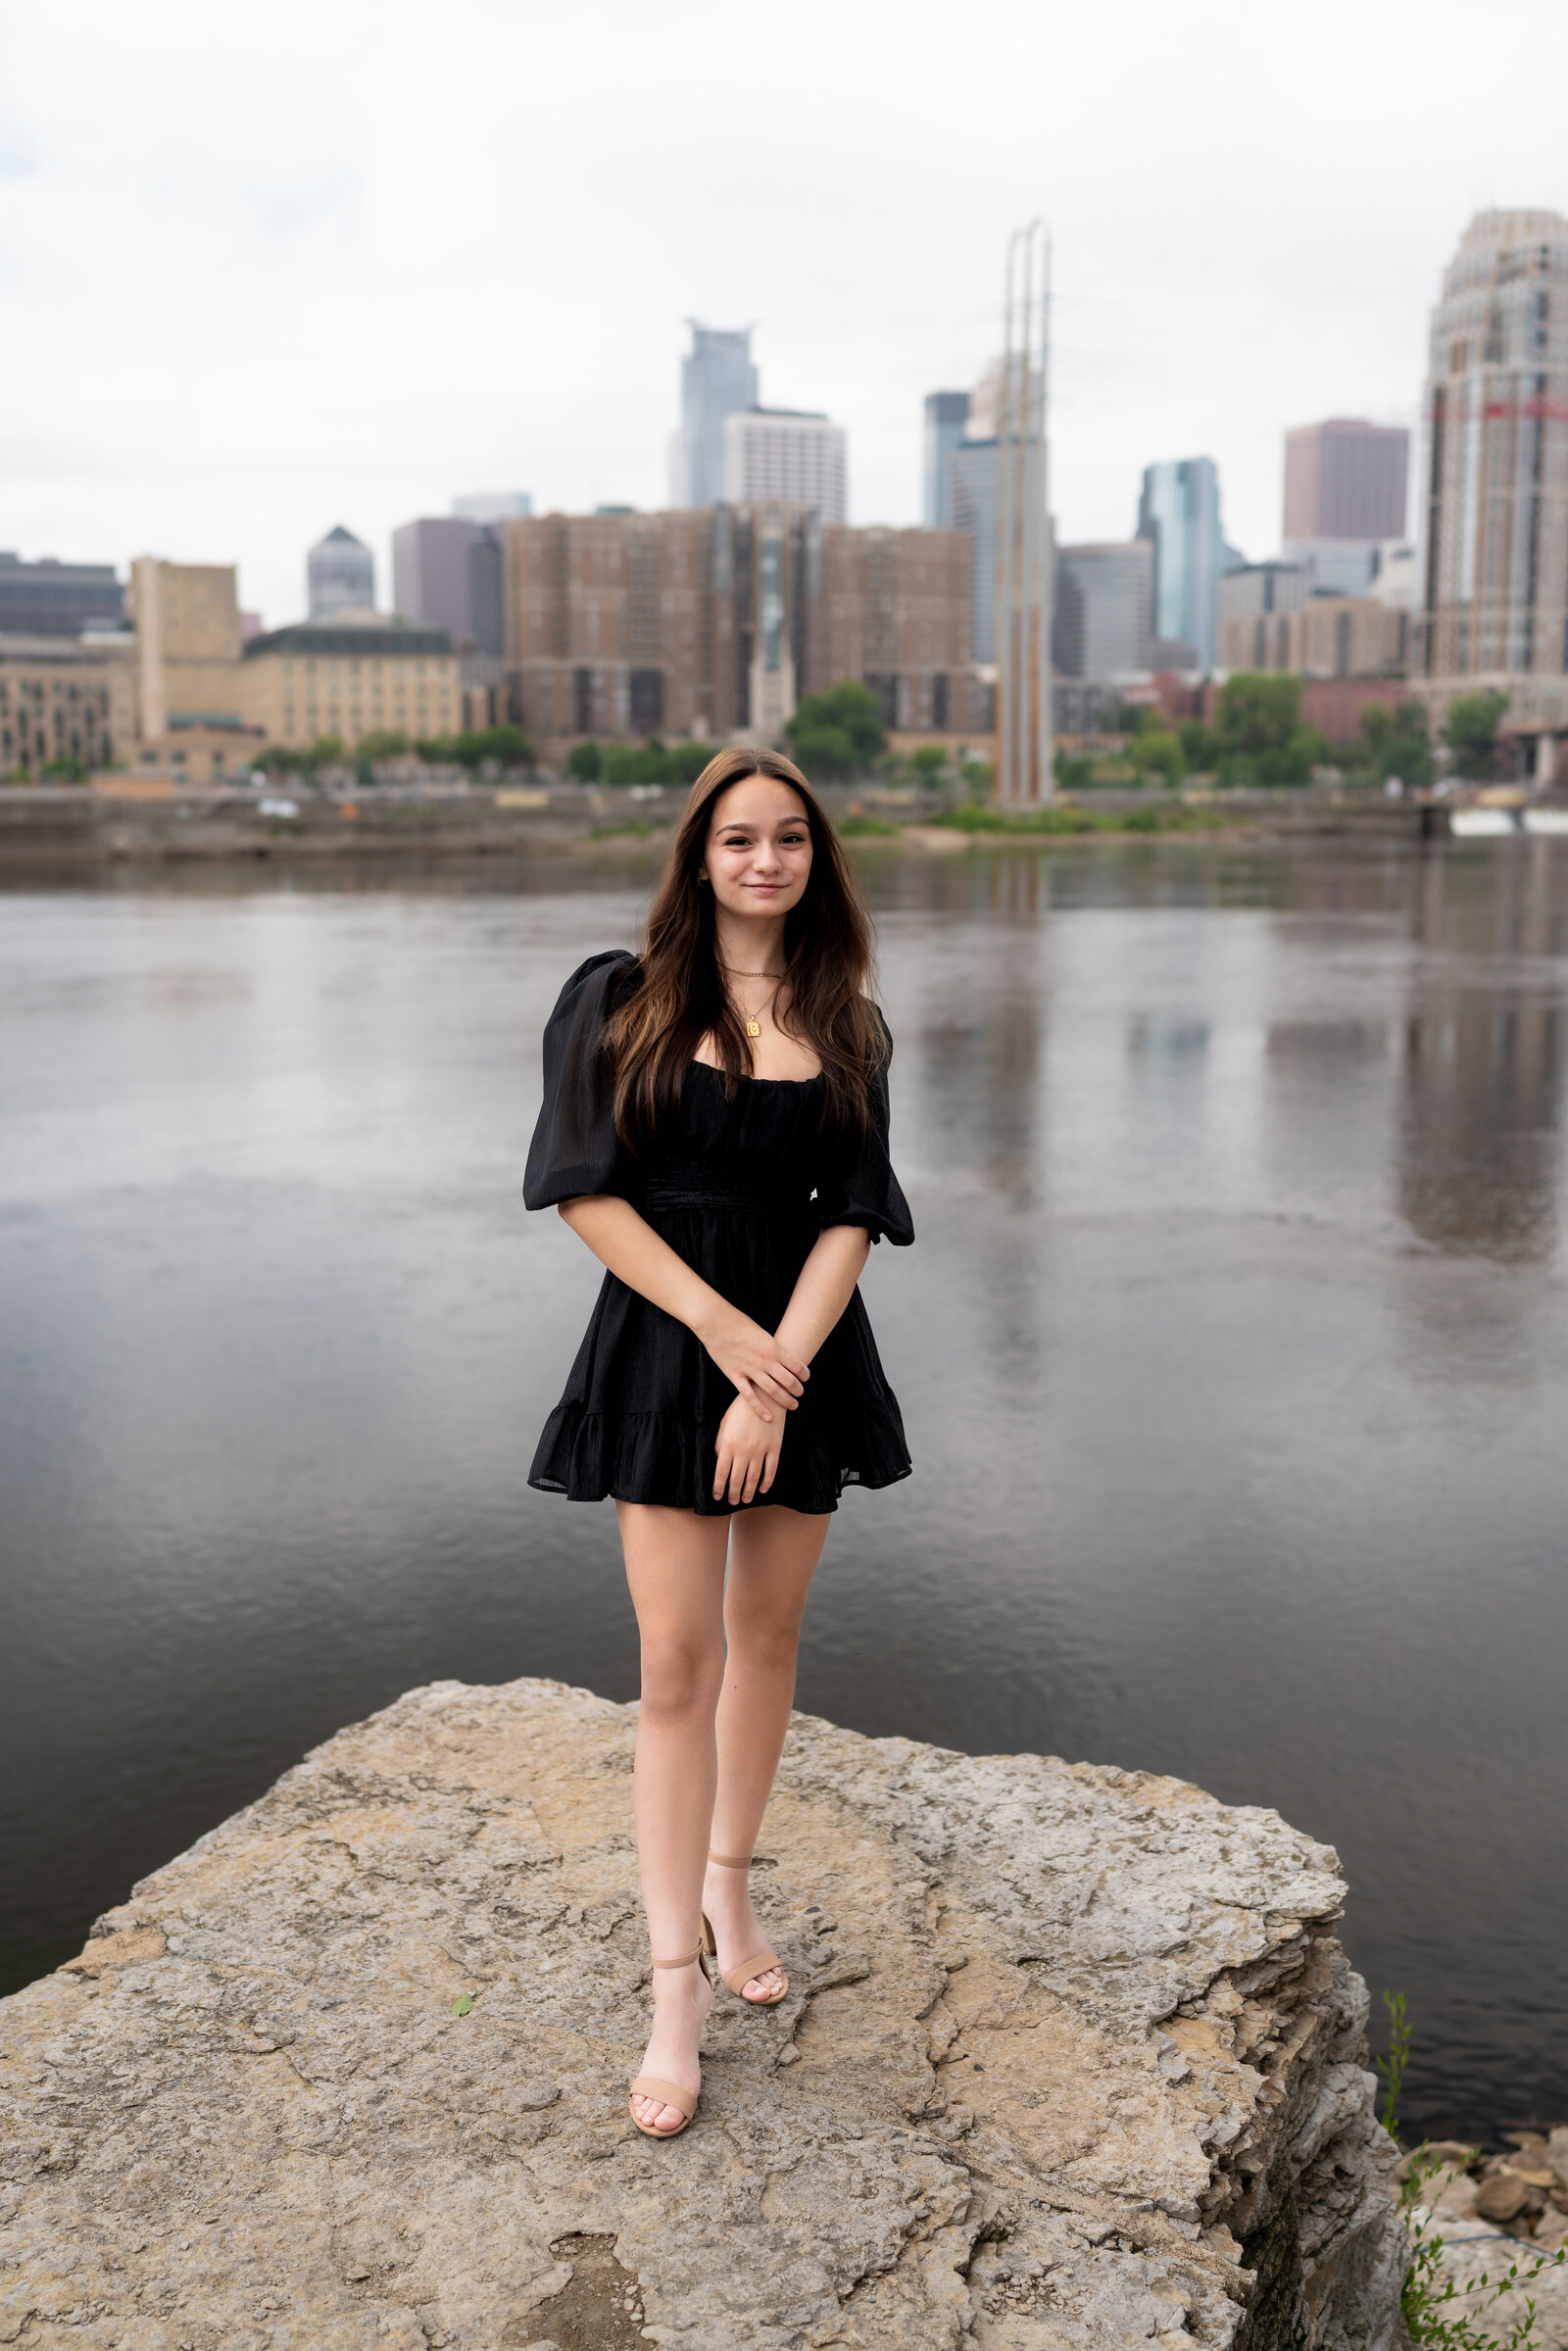 Senior girl in black dress stands on rock and smiles with Minneapolis in the background.